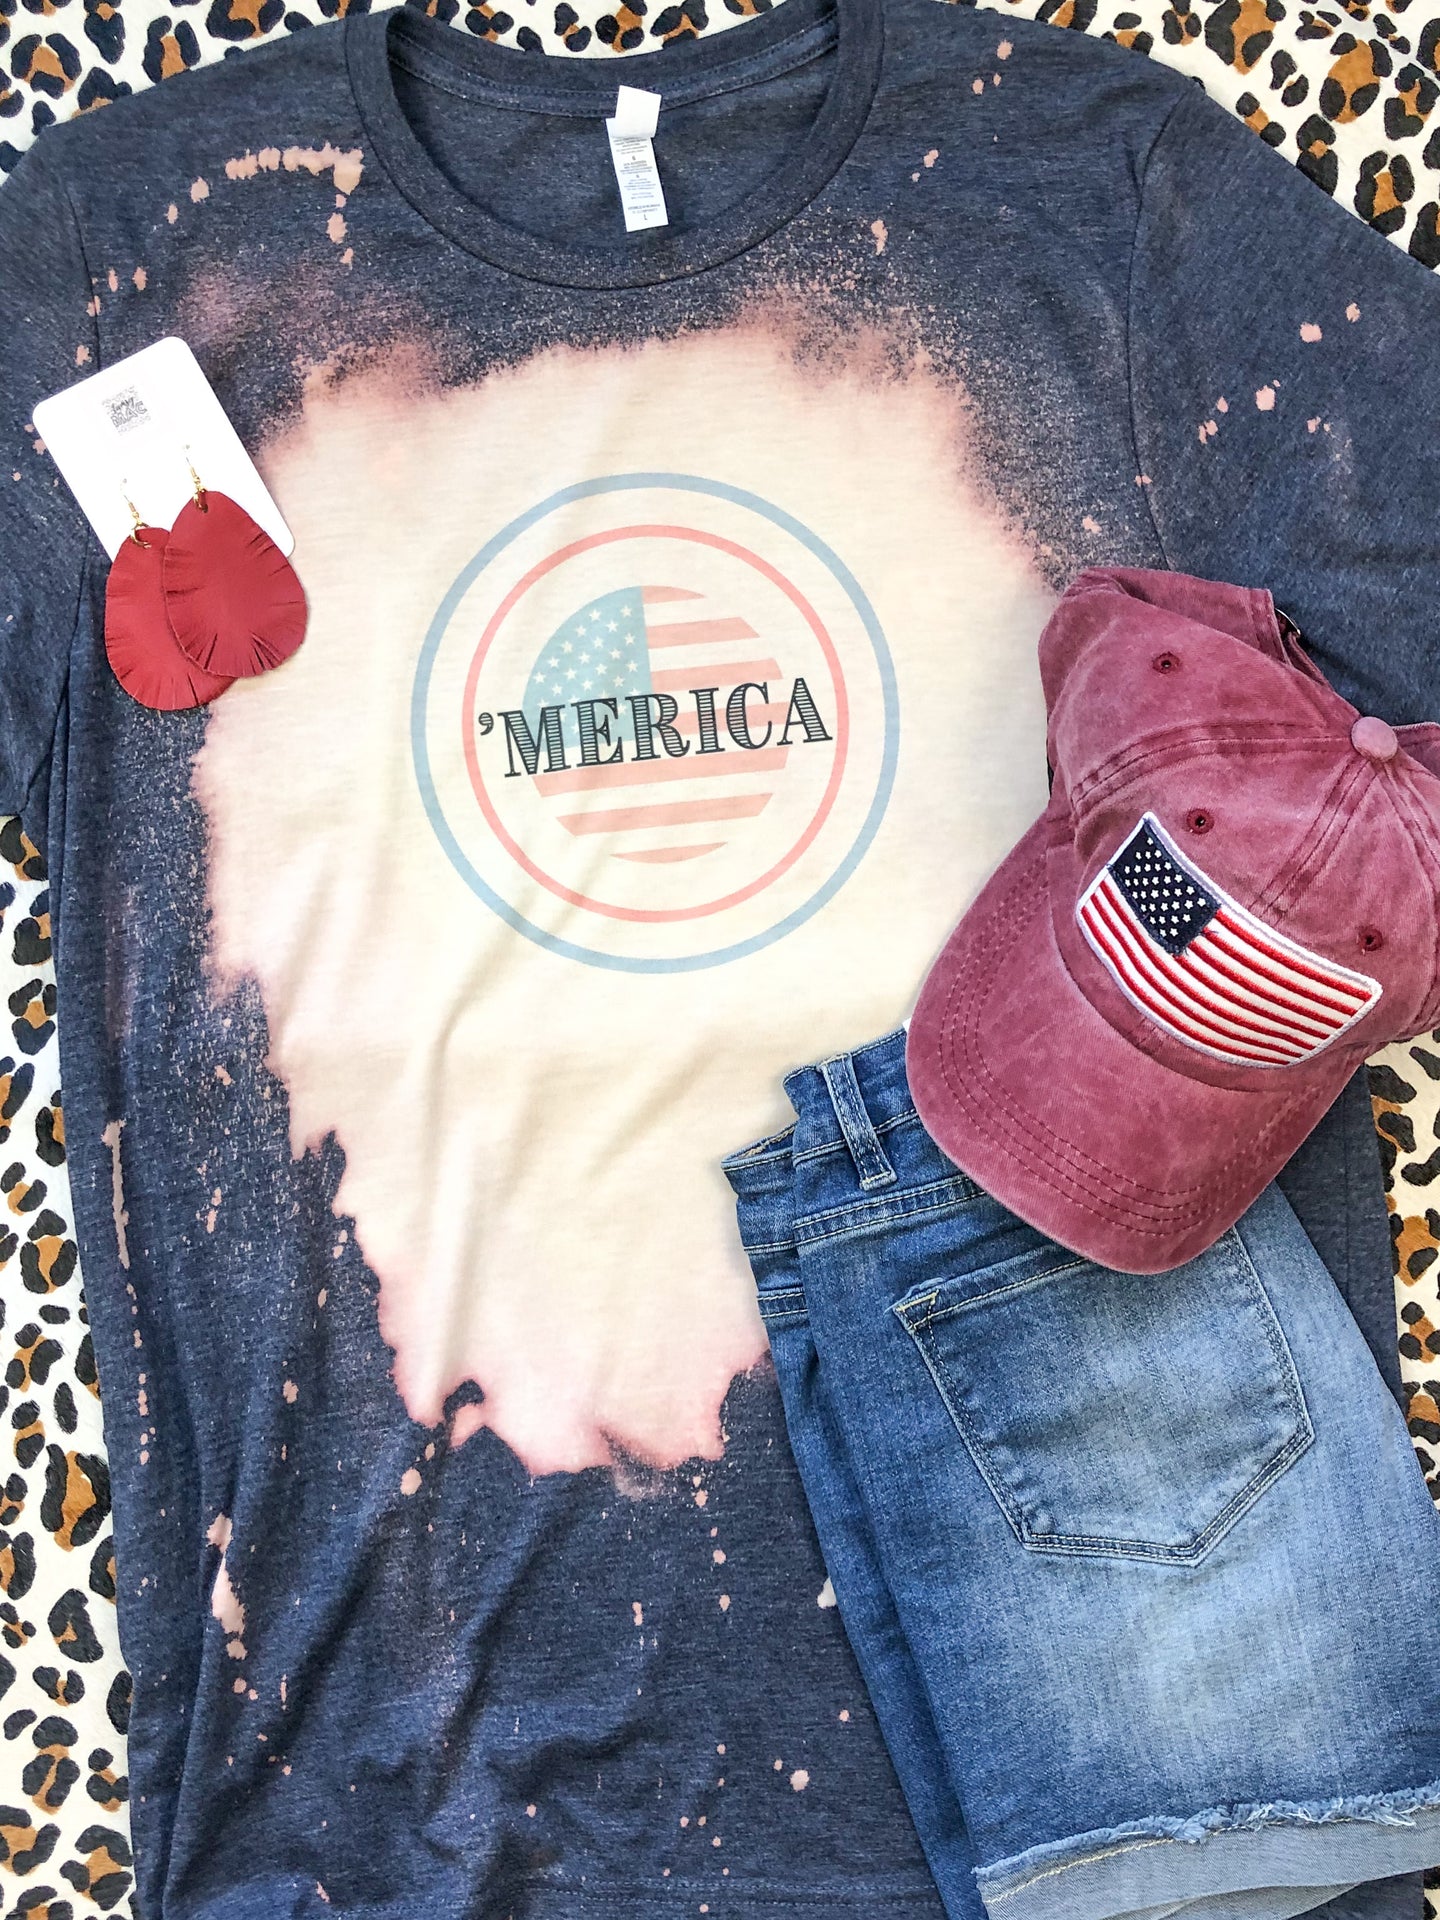 ‘Merica Tee - made in the USA